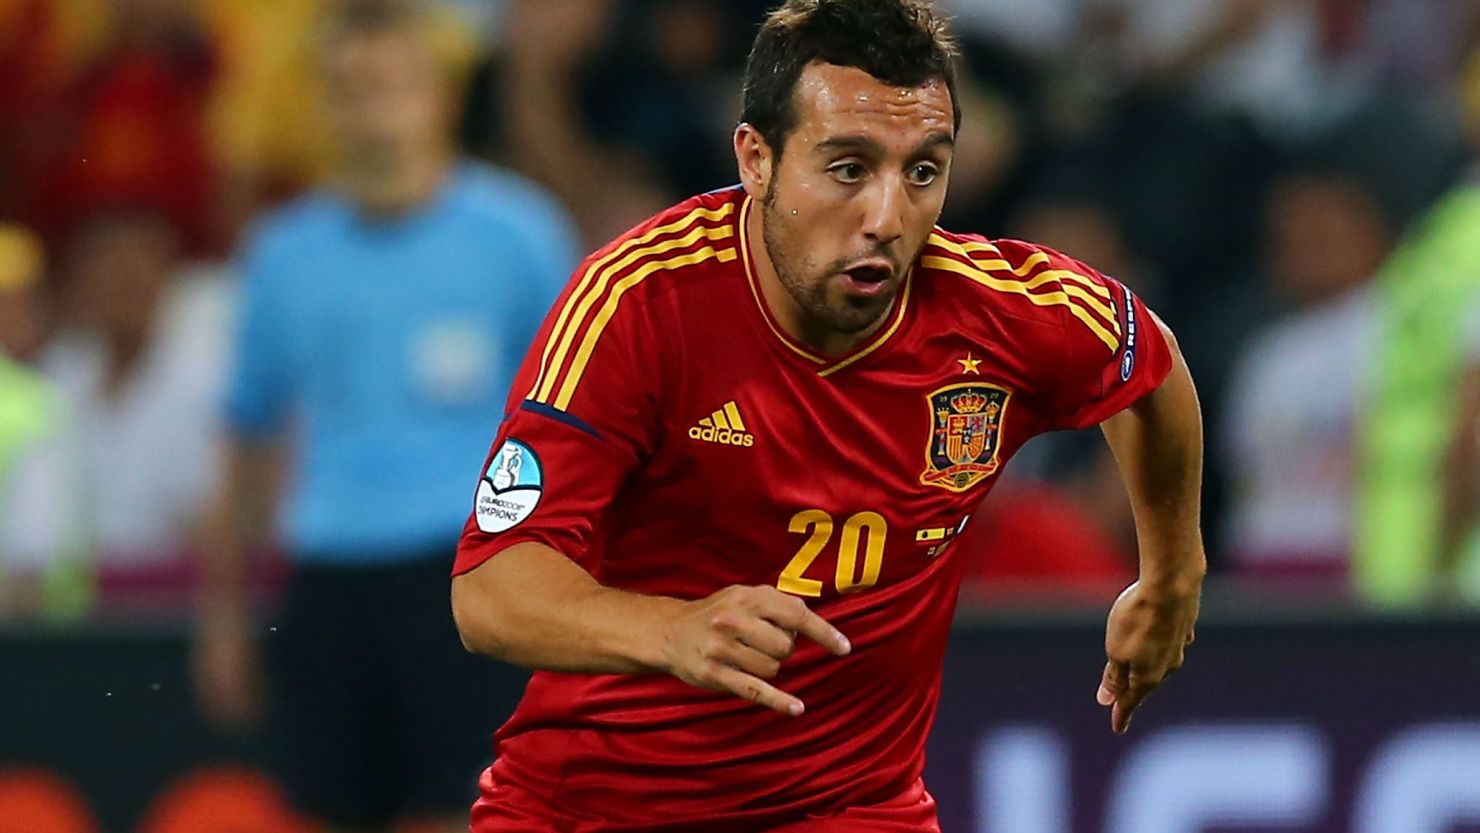 Spain's Santi Cazorla has been capped 45 times.